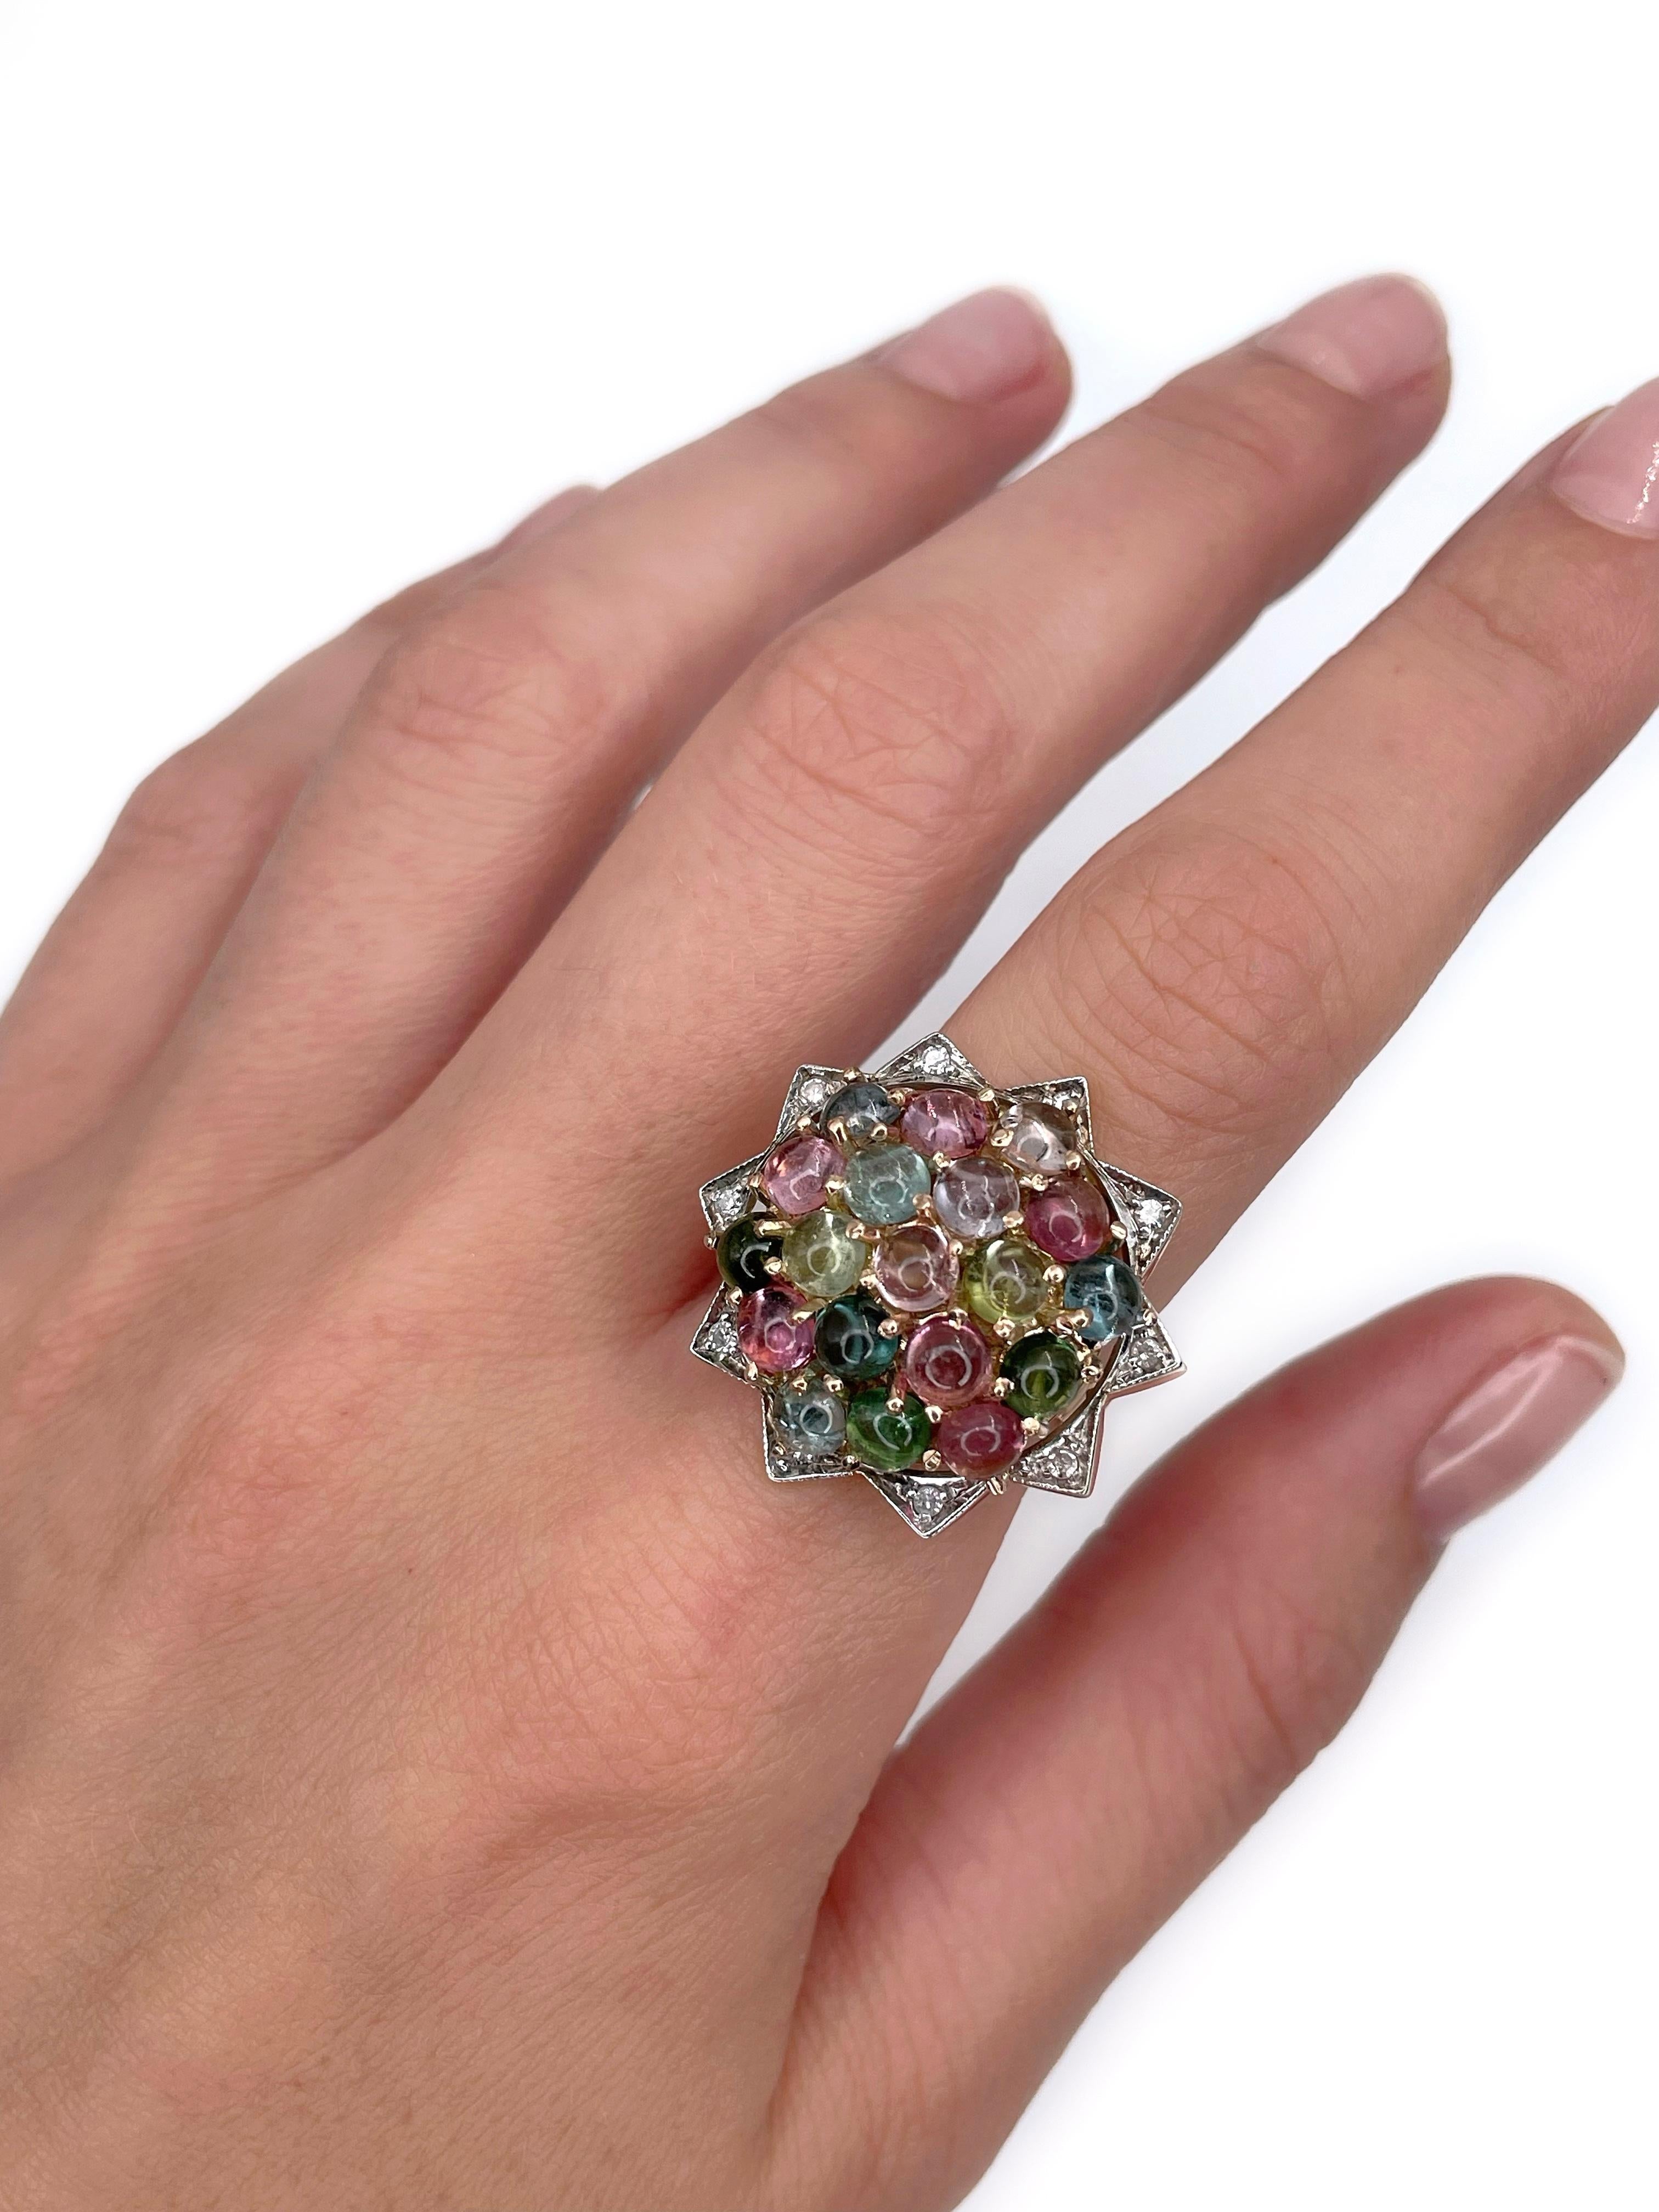 This is a vintage cocktail ring crafted in 14K gold. Circa 1980. 

The piece features:
- 19 tourmalines (cabochon cut, TW 6.50ct, multicolor, VS-SI)
- 10 diamonds (17 facet., TW 0.12ct, W-STW, SI-P1)

Weight: 11.39g
Size: 17 (US 6.5)

IMPORTANT: